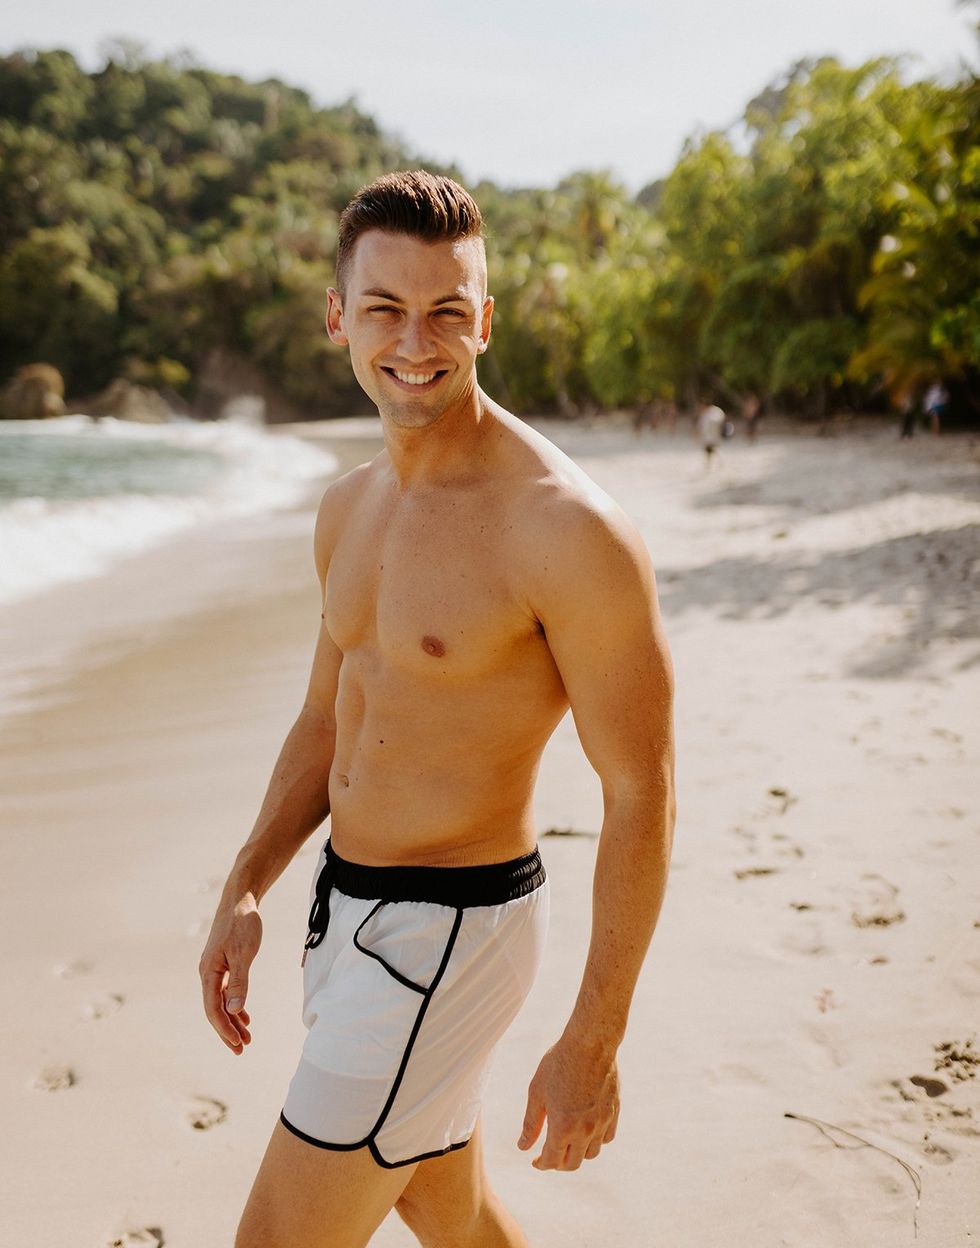 25+ Thirsty Pics of Gay Traveler Influencers Michael and Matt in Costa Rica